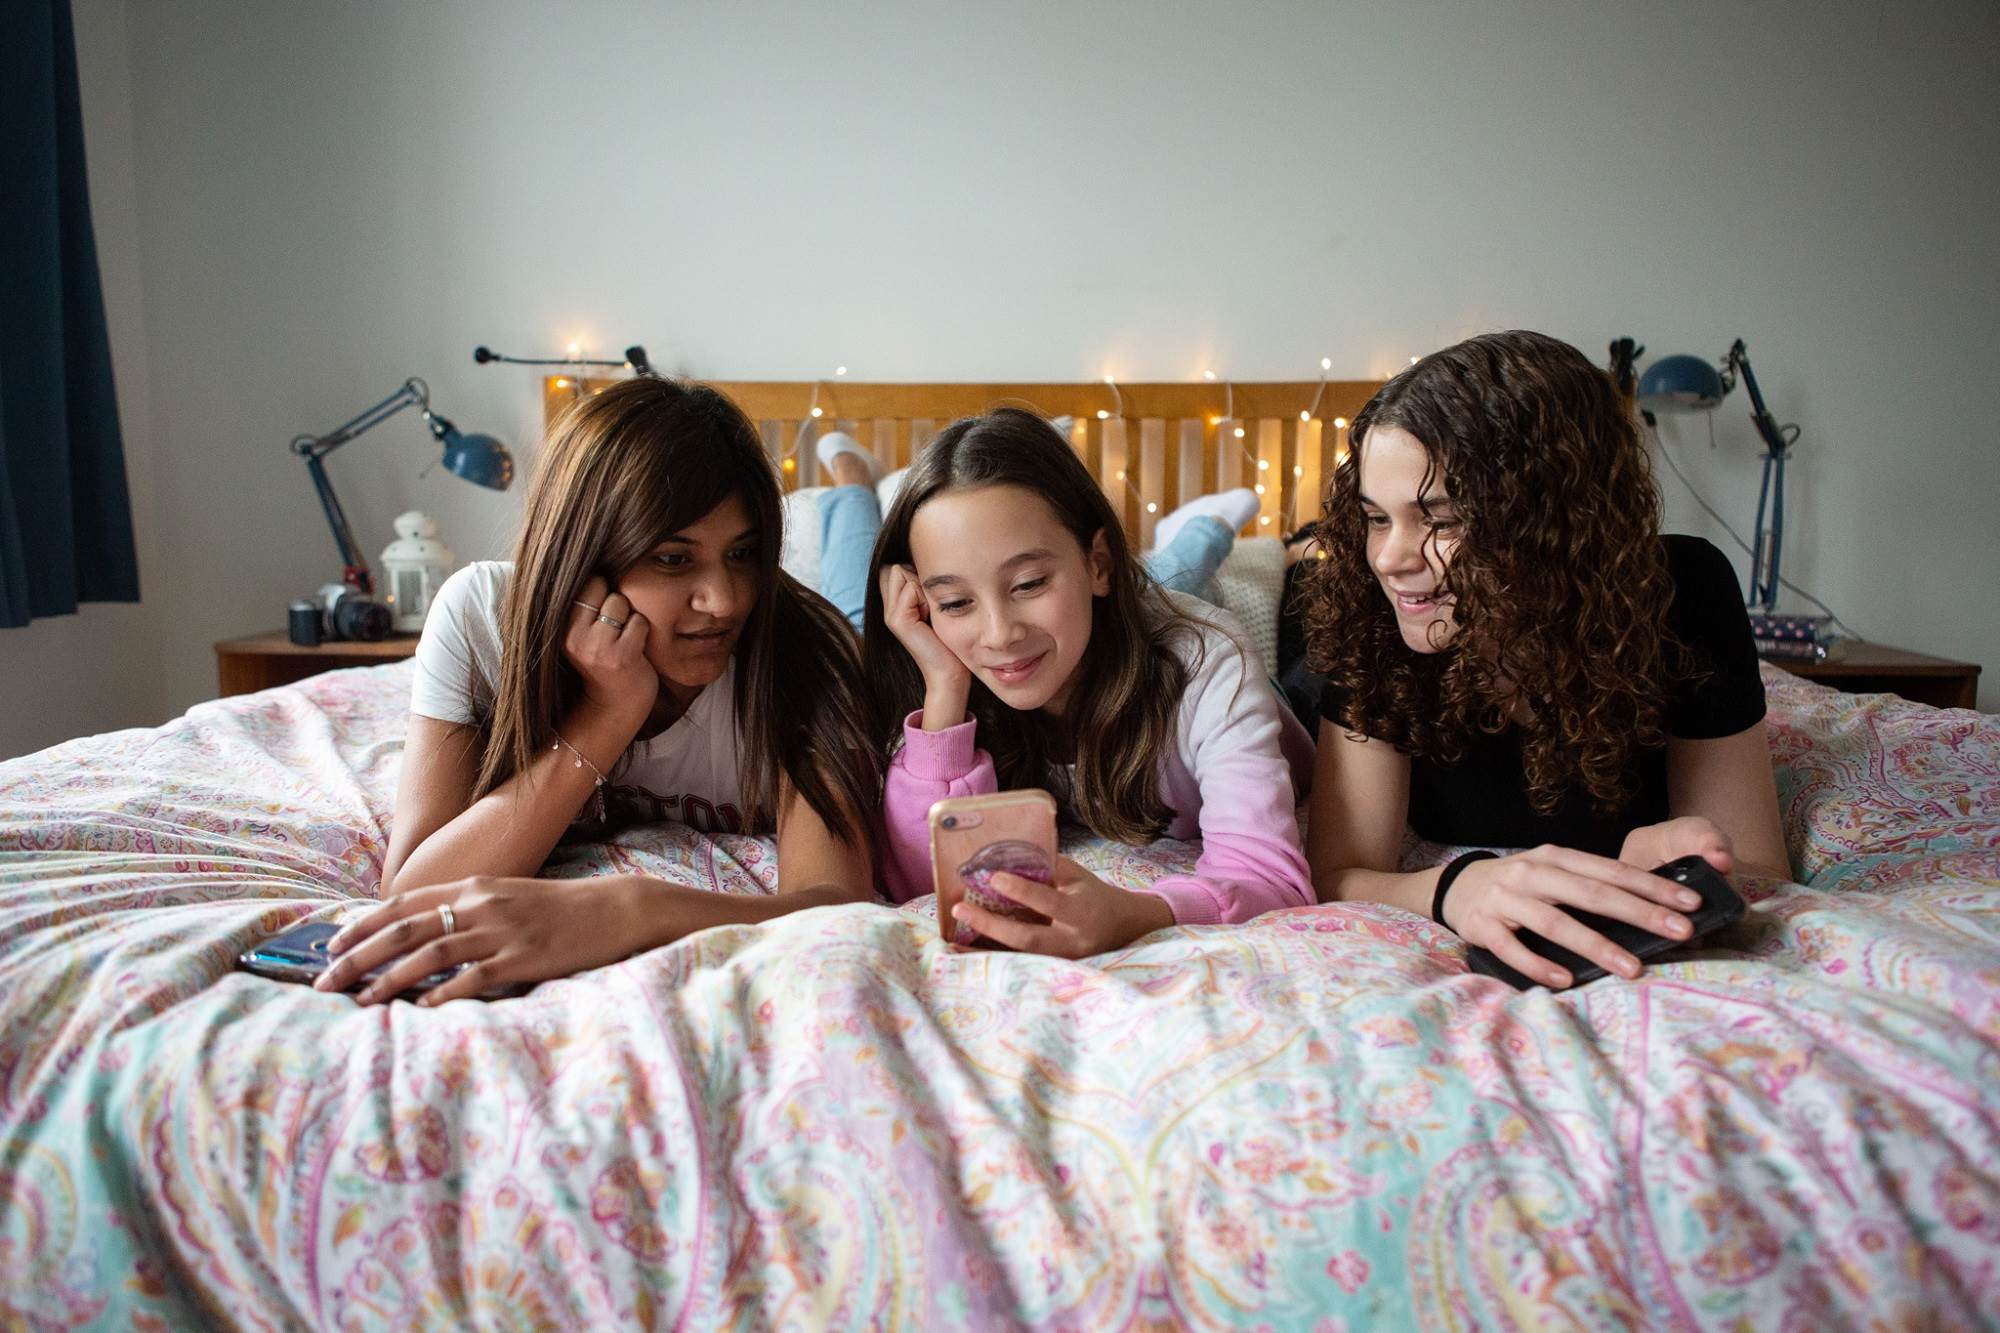 Two Teen Girls And Young Girl Smiling While Looking At Mobile Content On Bed